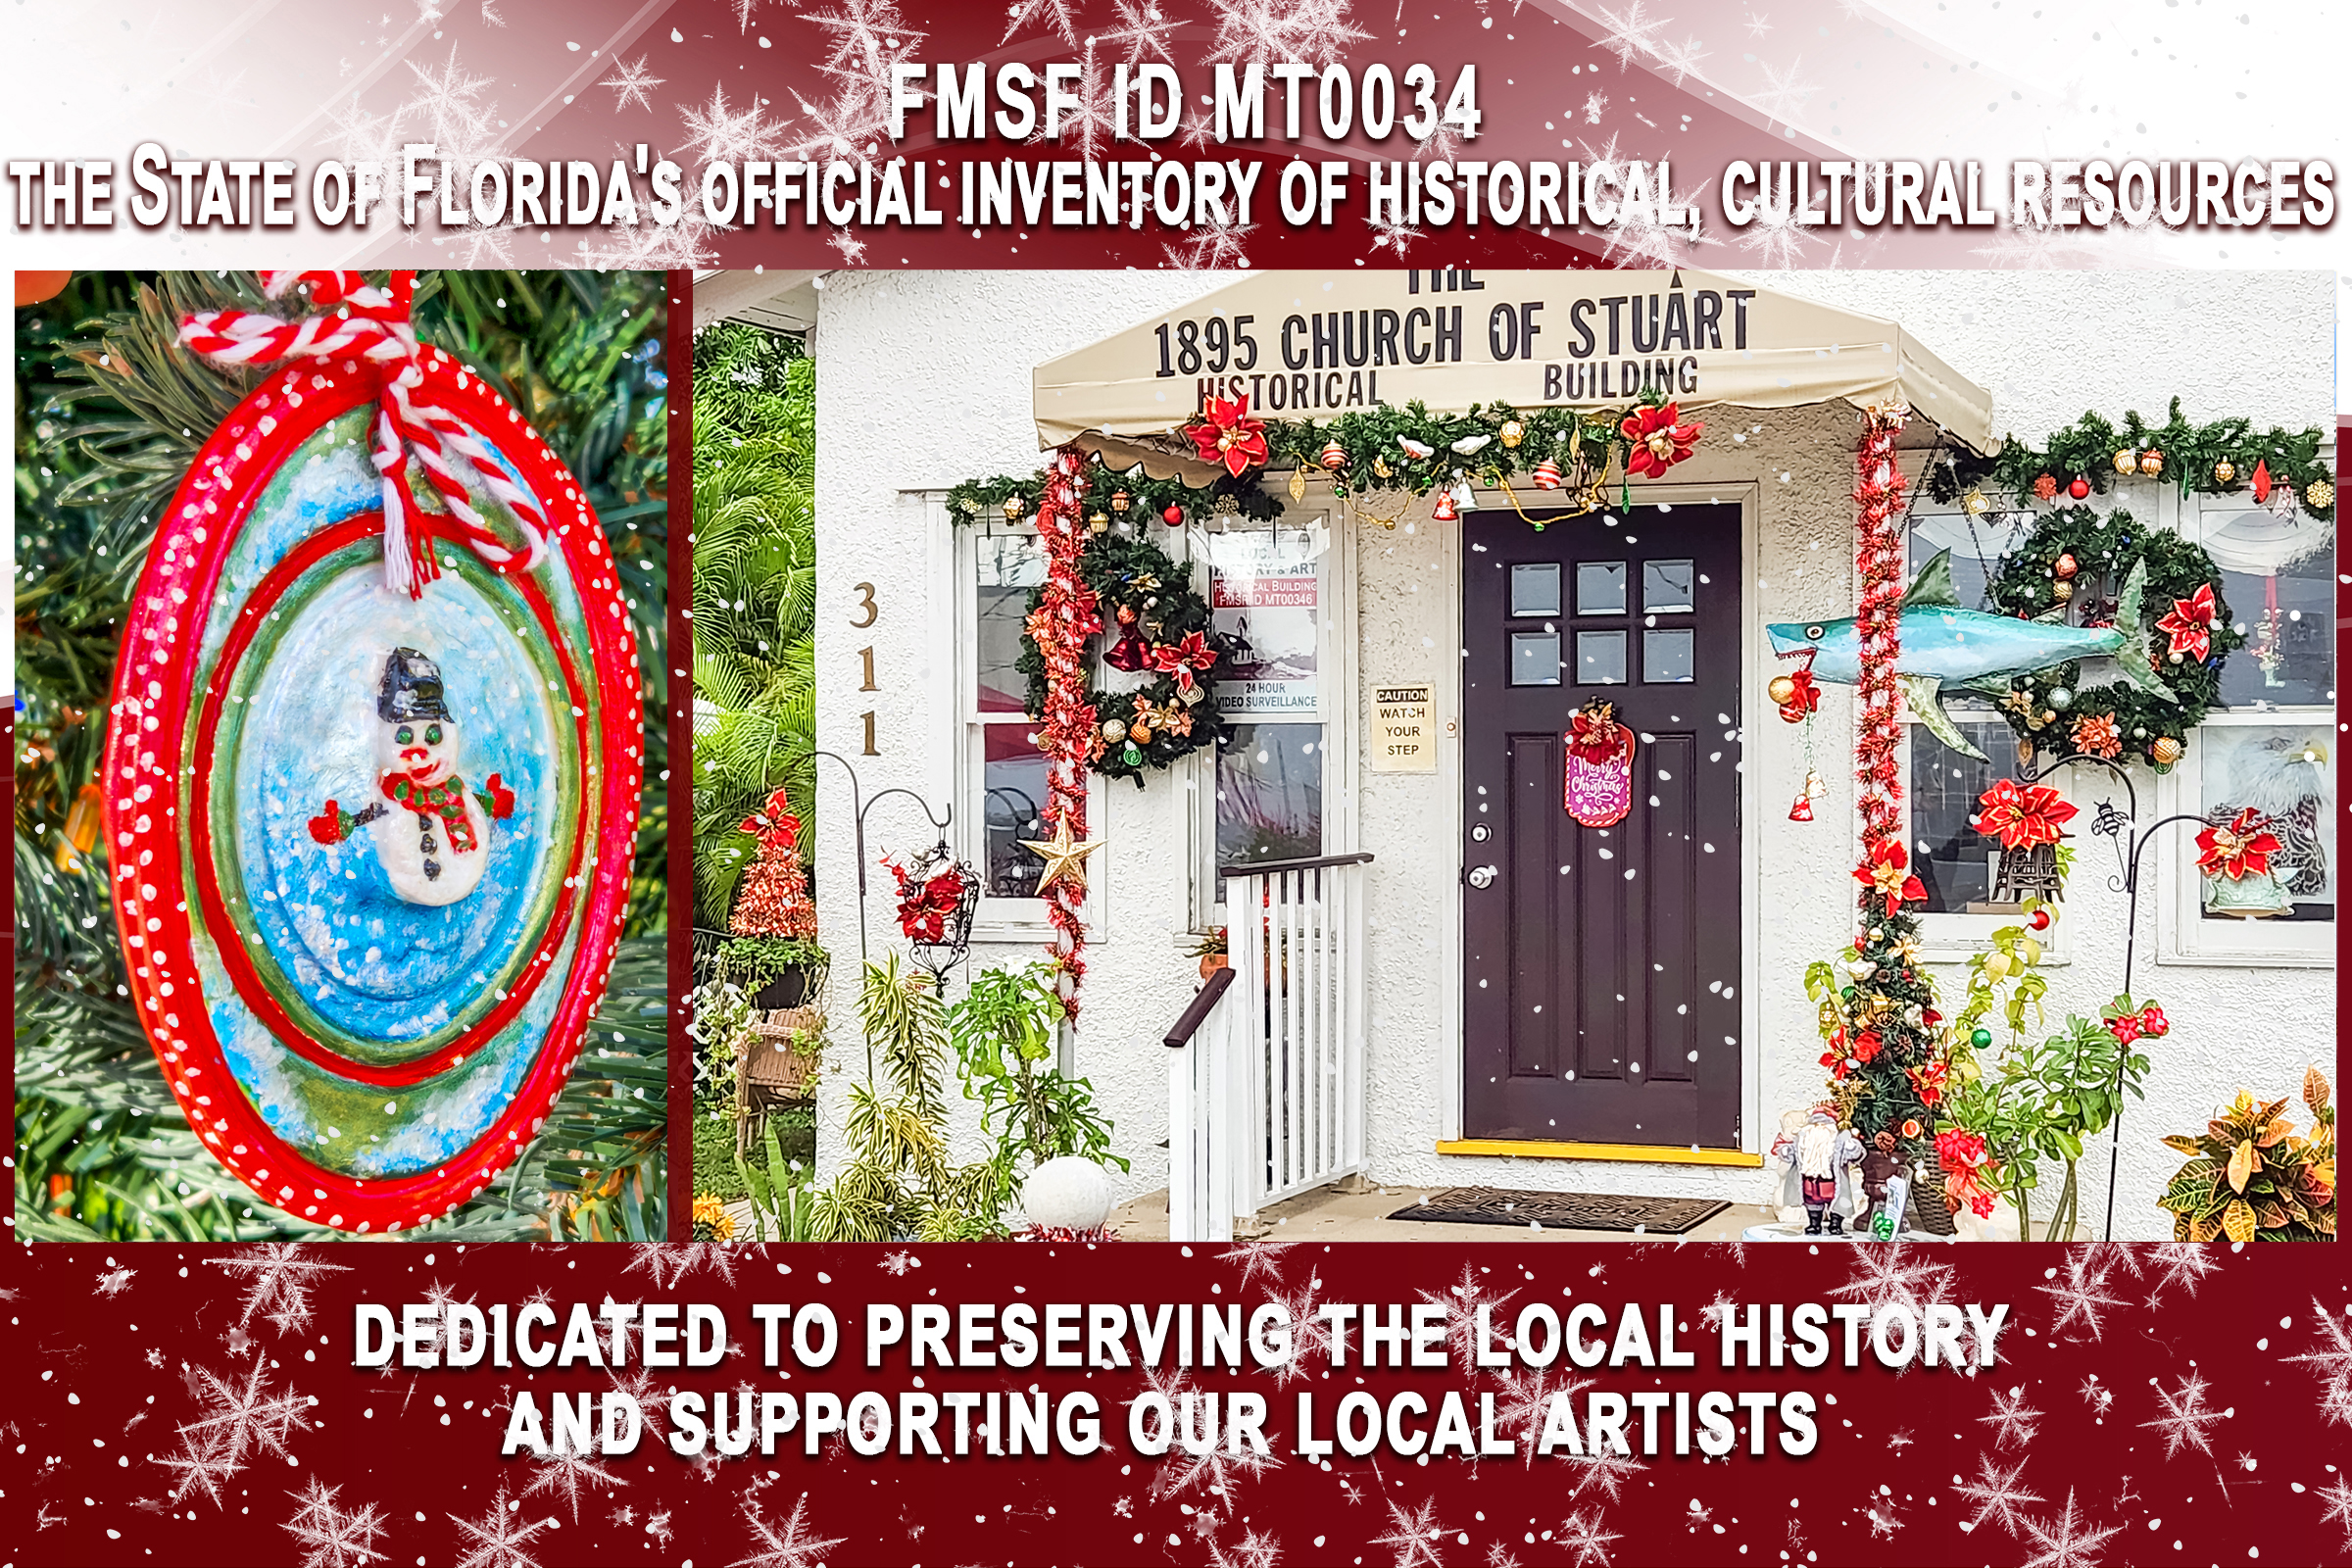 Holiday Season Fine Art Sale at The 1895 Church of StuArt, the oldest church building located in what is now Martin County, Florida. Supporting Local History and Art. Historical Preservation, the City of Stuart, Martin County, Florida. Historical Building Tour